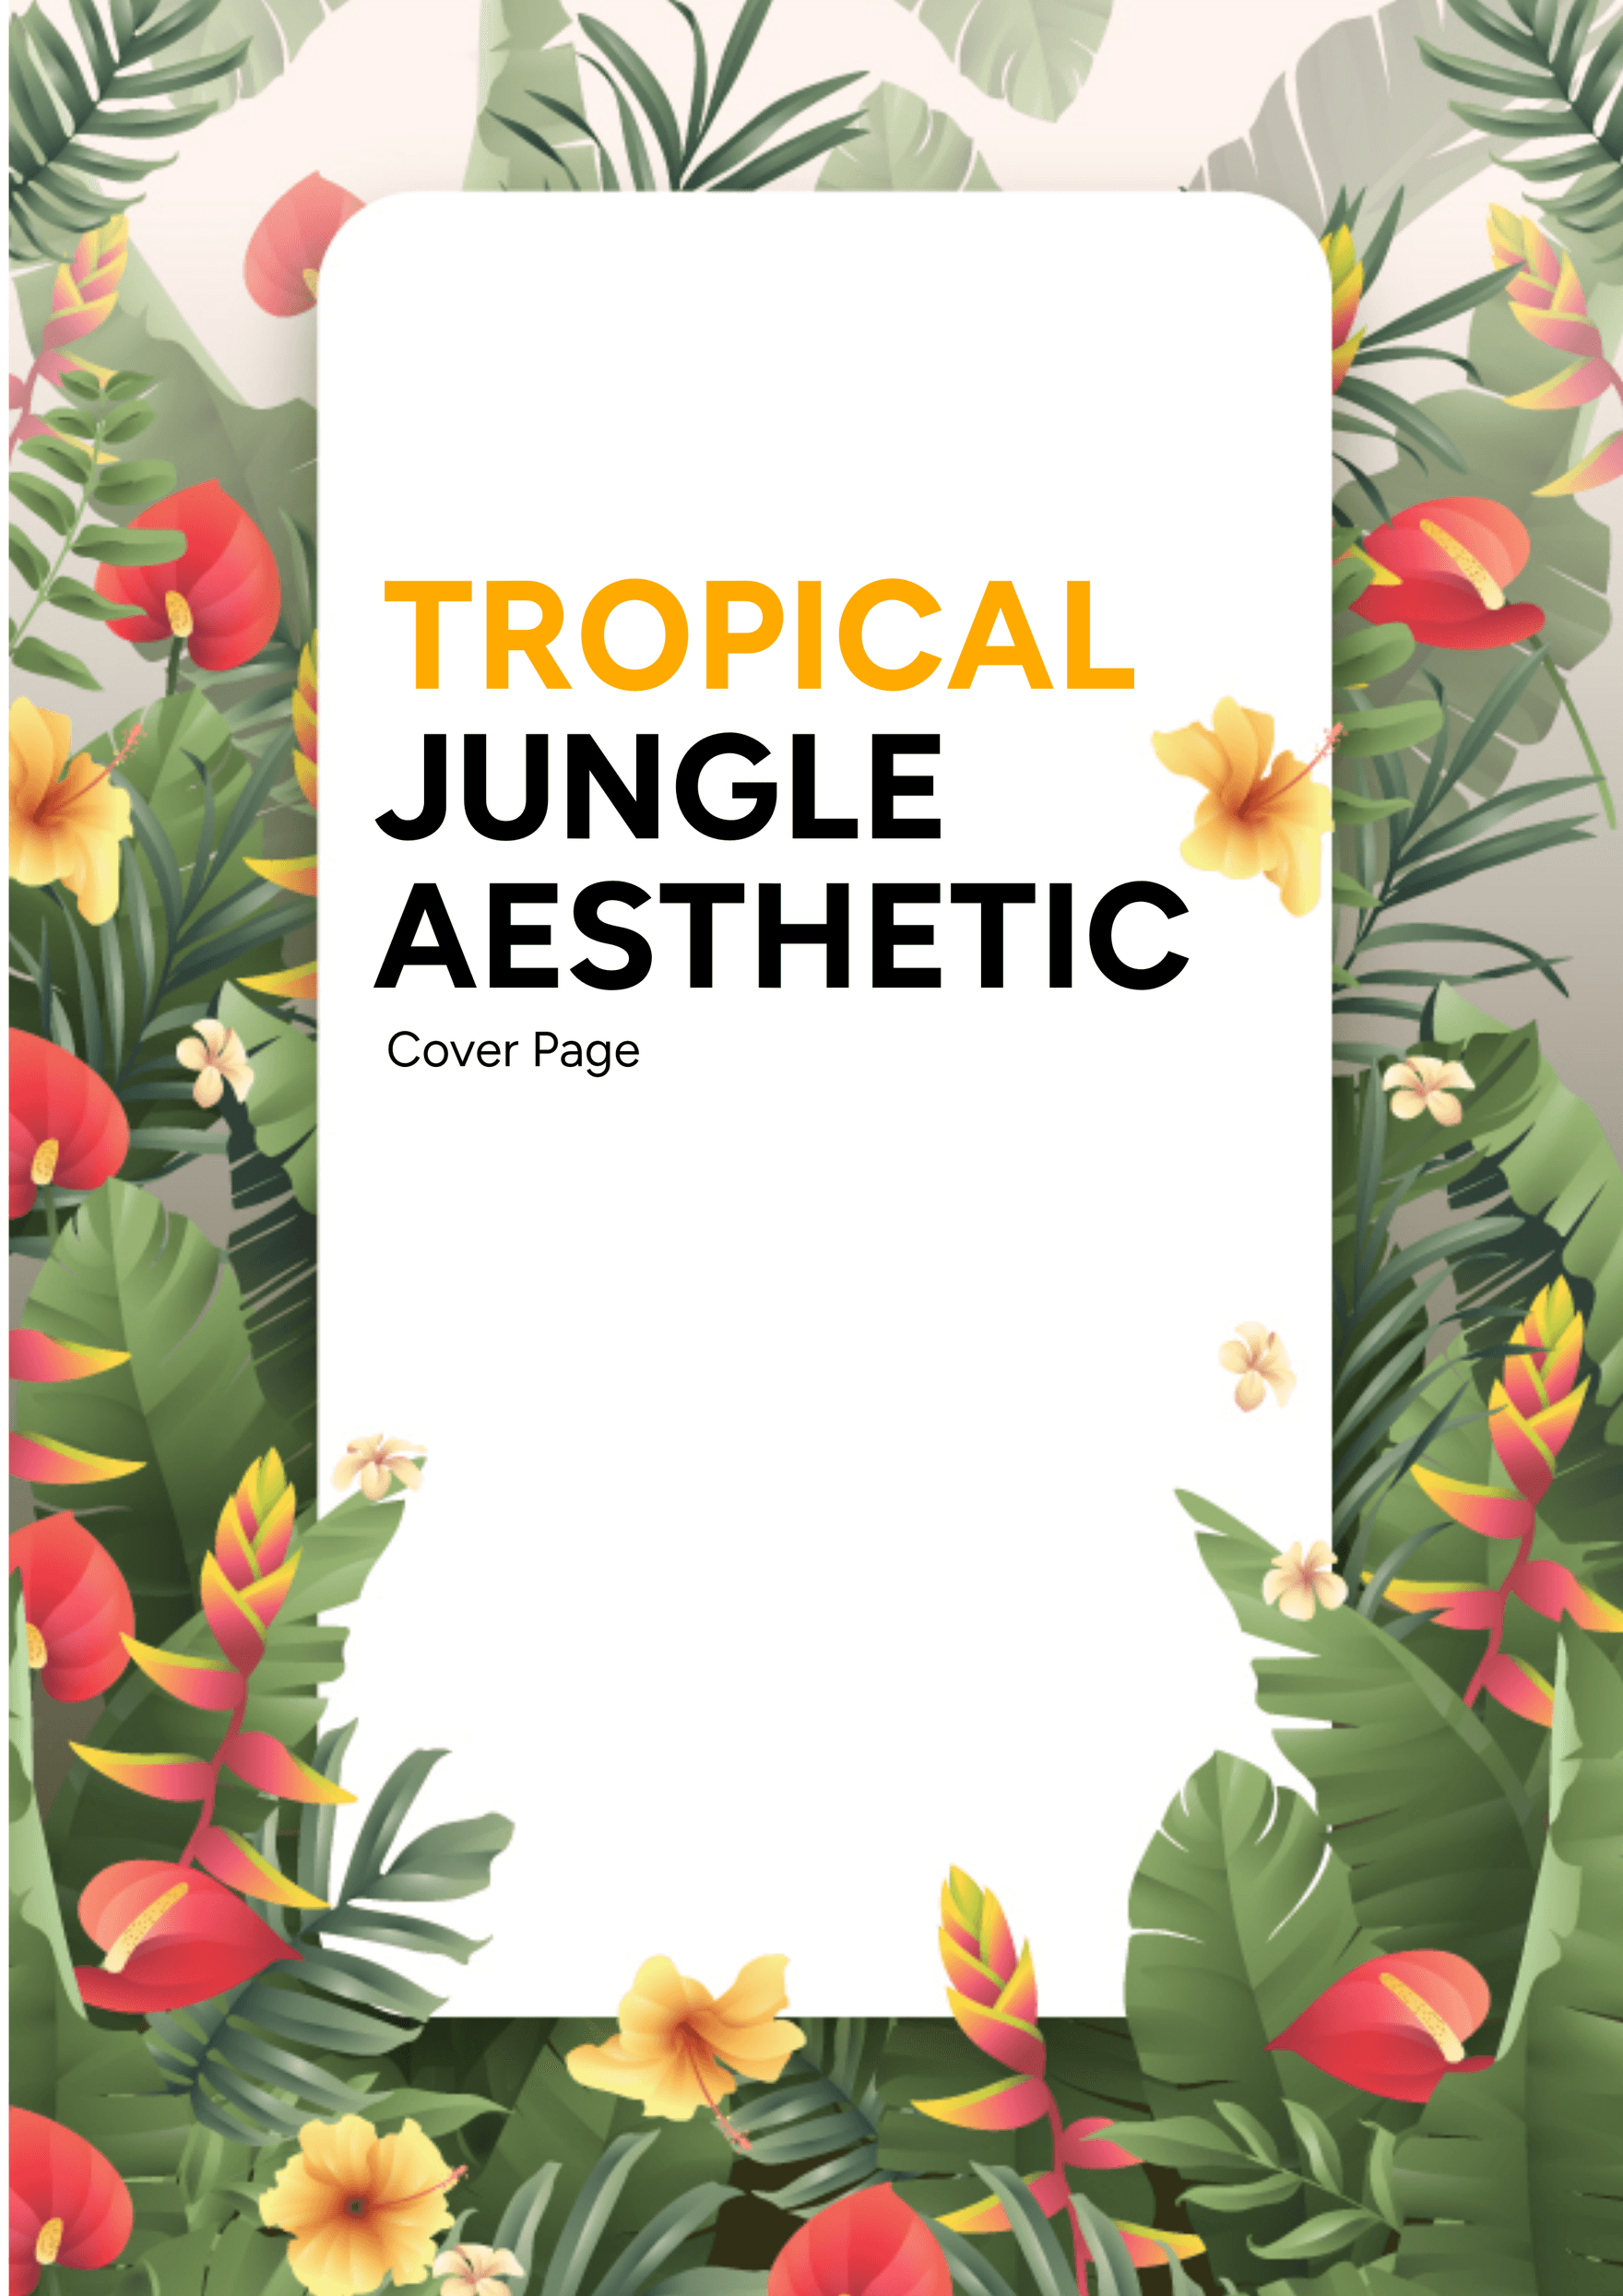 Tropical Jungle Aesthetic Cover Page Template